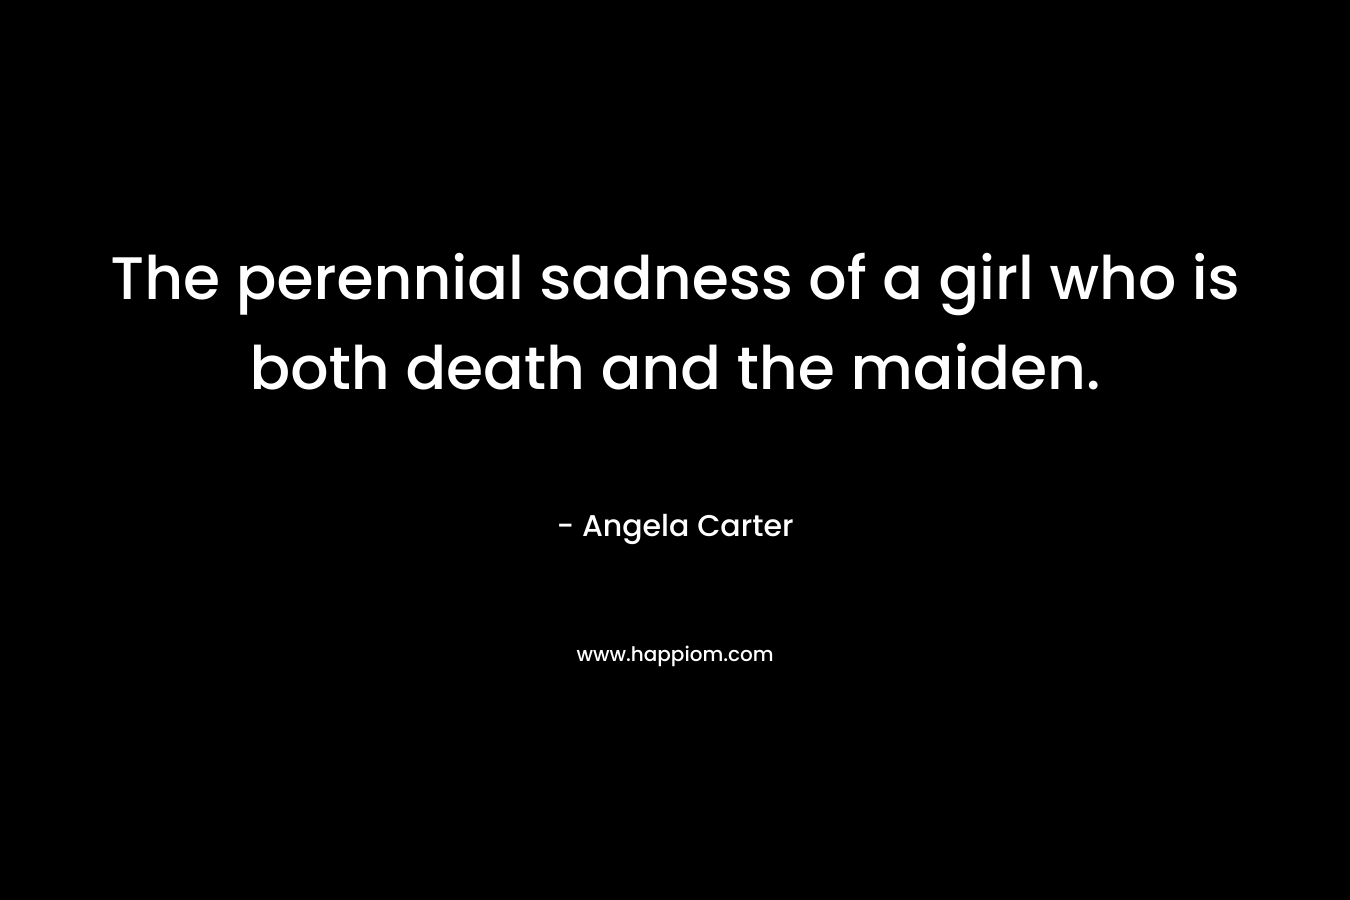 The perennial sadness of a girl who is both death and the maiden. – Angela Carter